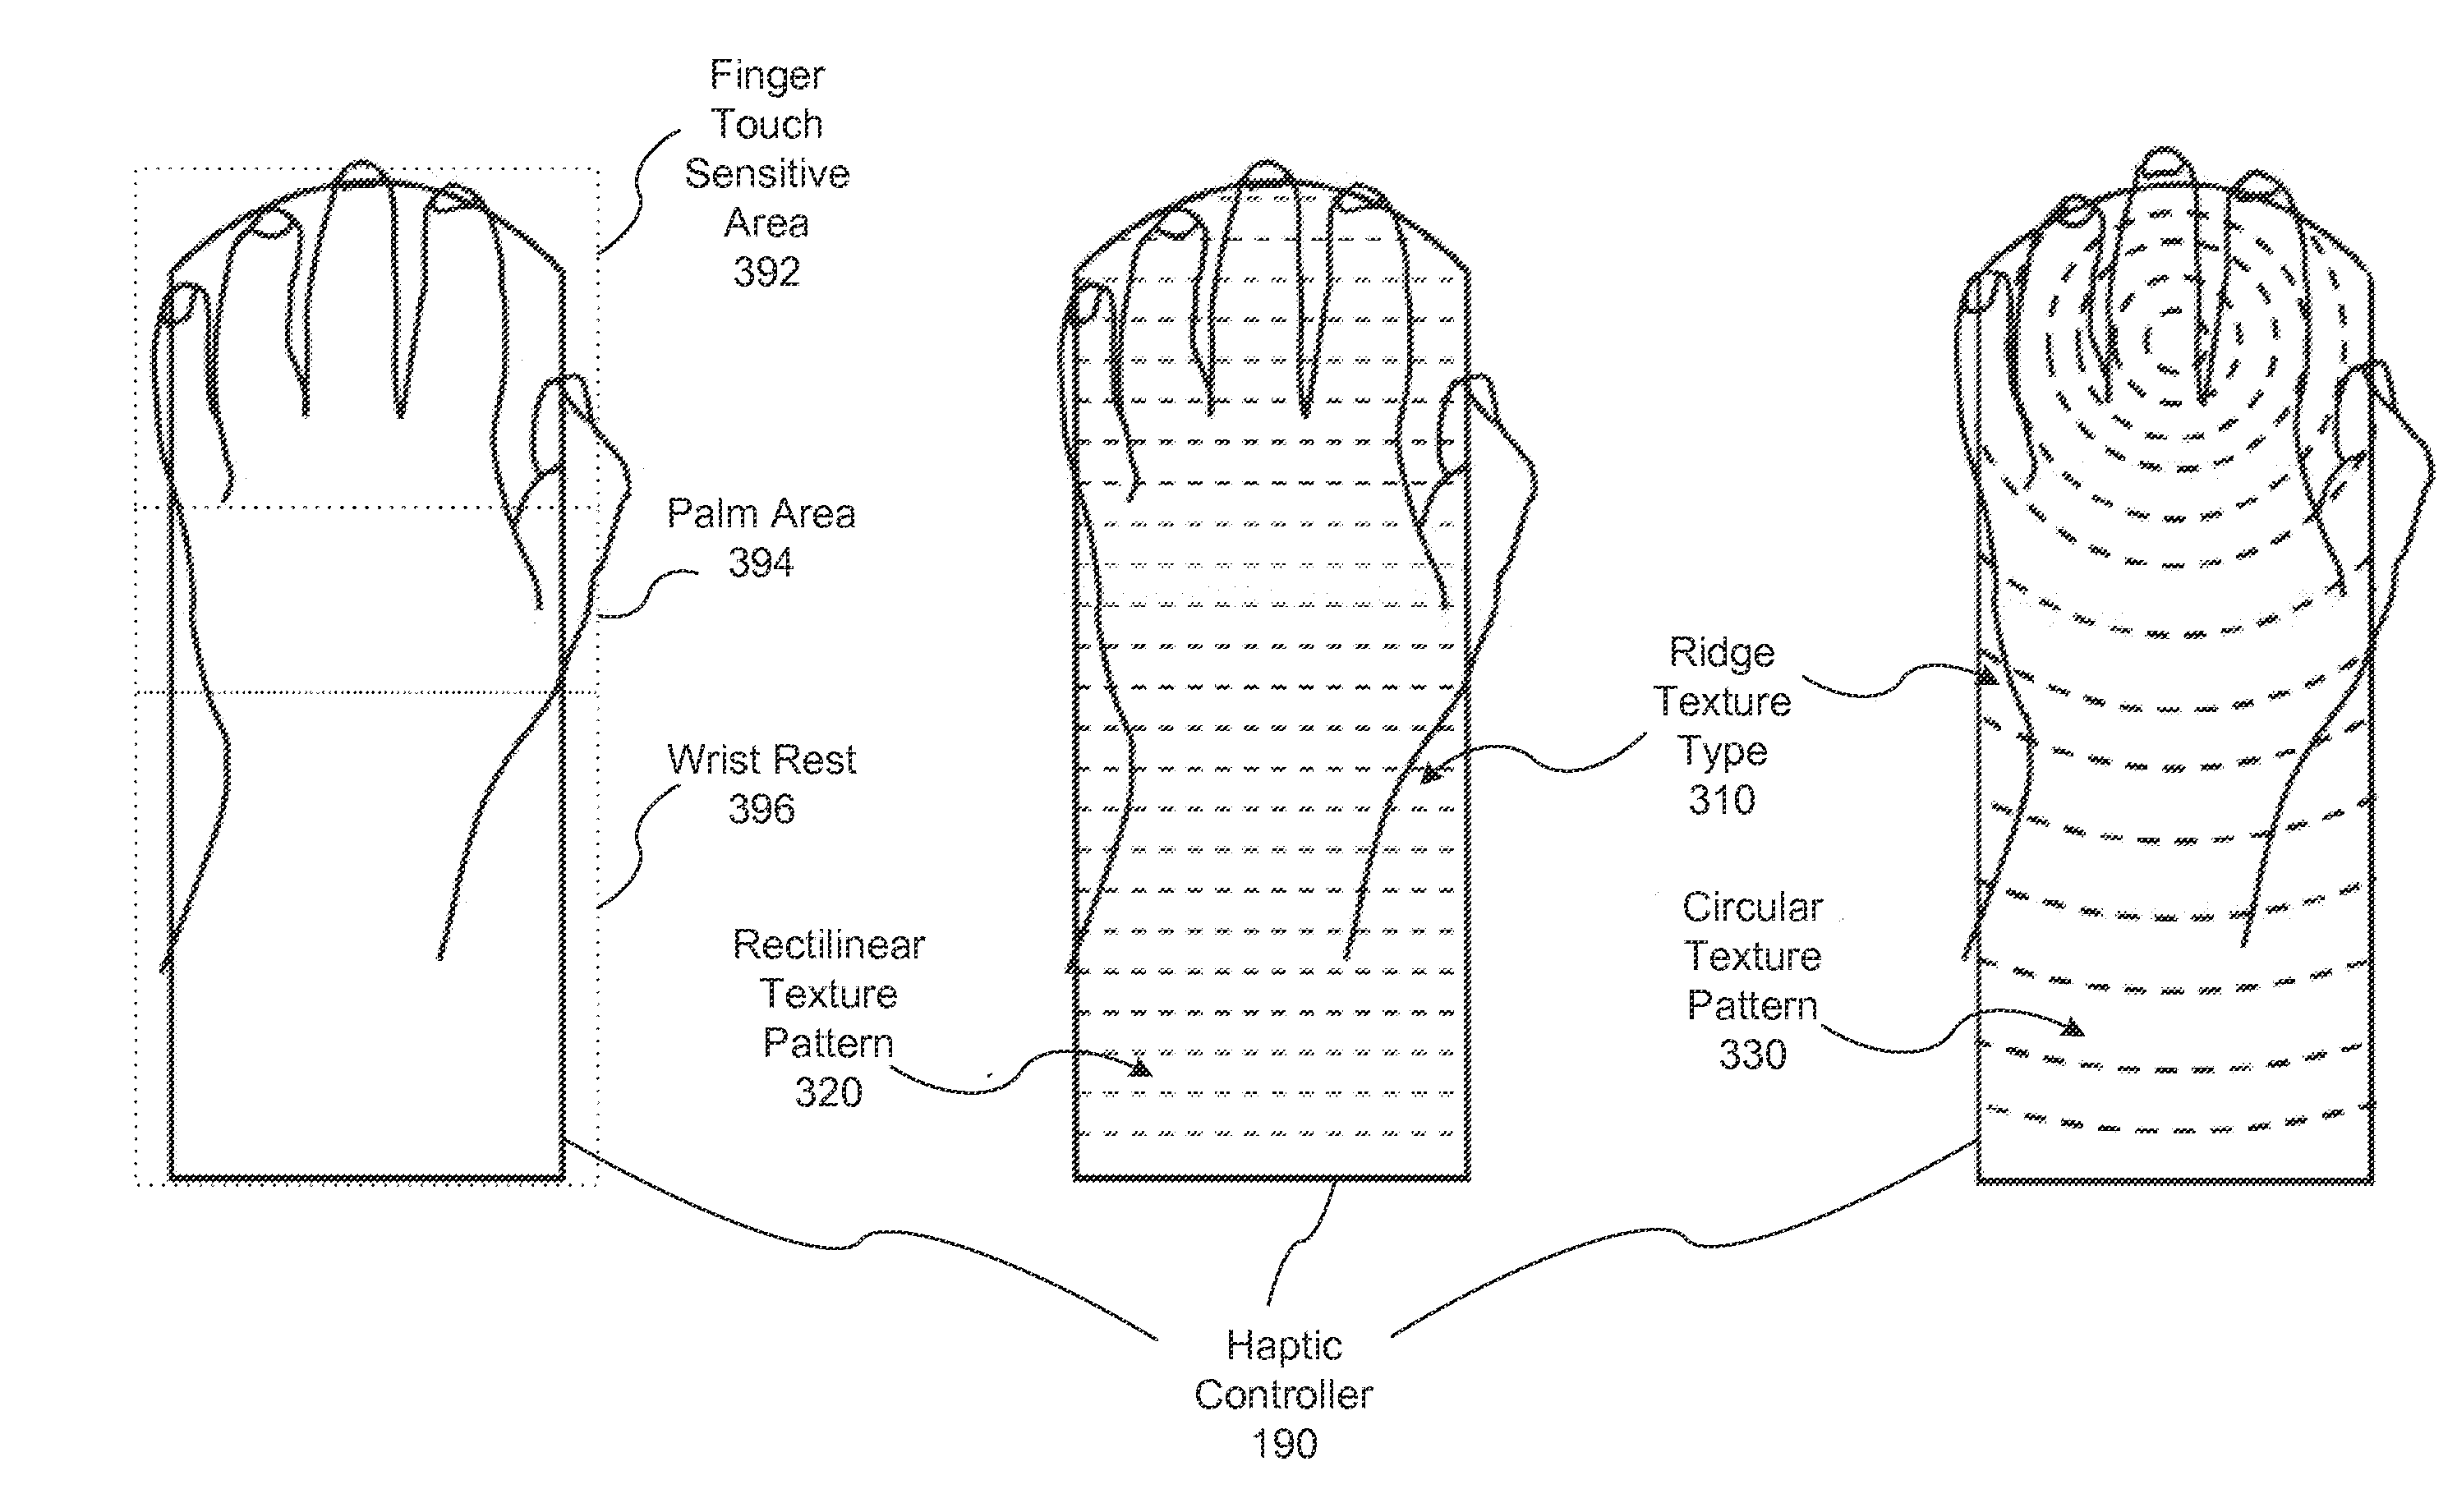 Techniques for dynamically changing tactile surfaces of a haptic controller to convey interactive system information